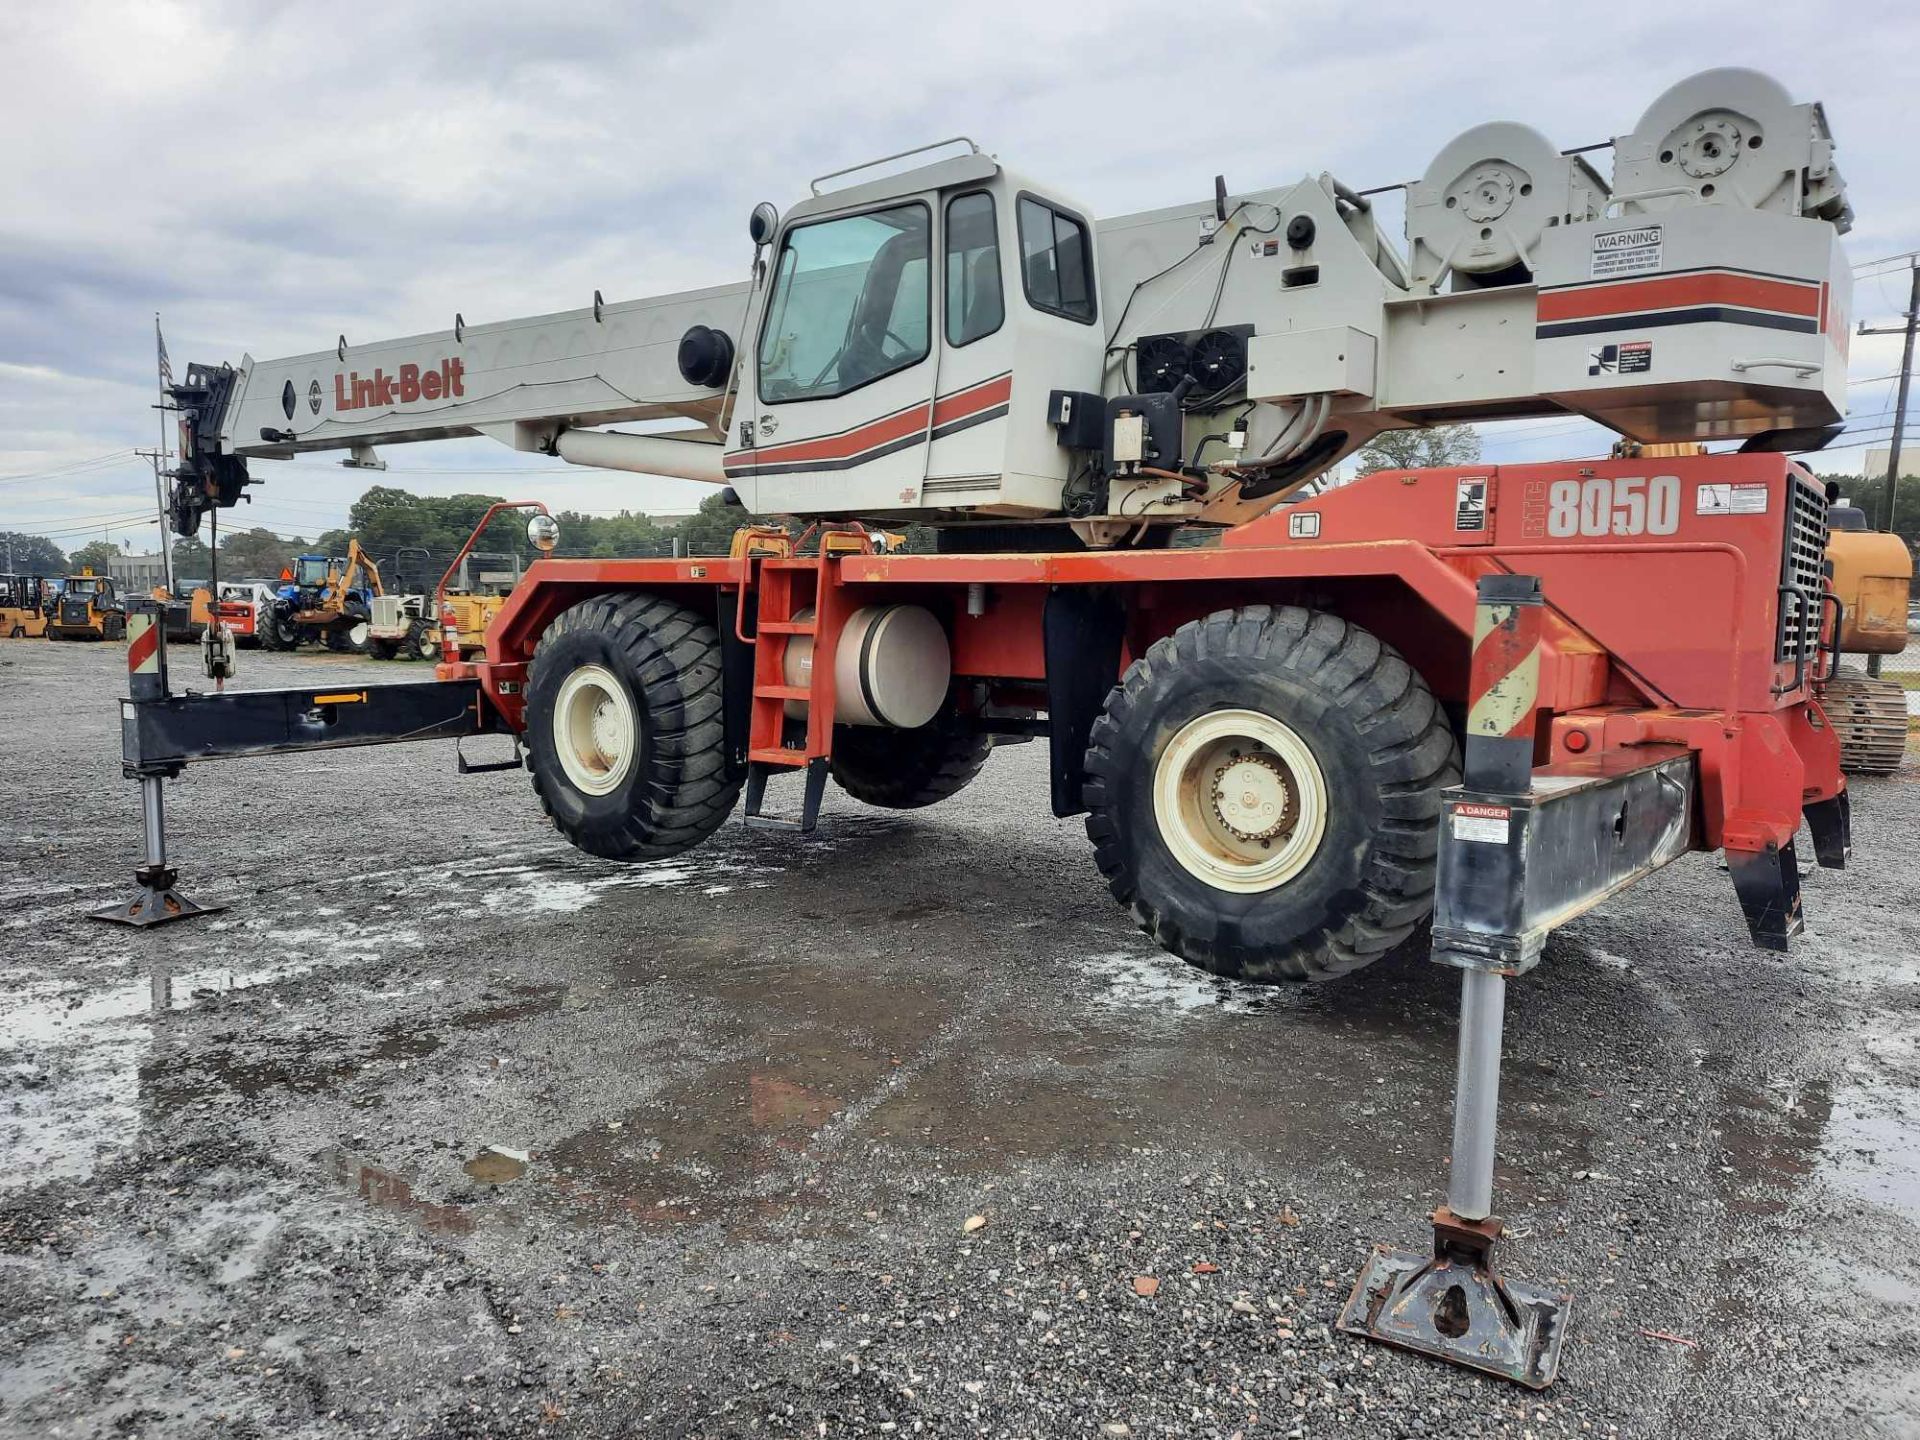 (SUBJECT TO OWNER CONFIRMATION) 2007 Link-Belt RTC8050 Series II Rough Terrain Crane - Image 3 of 78